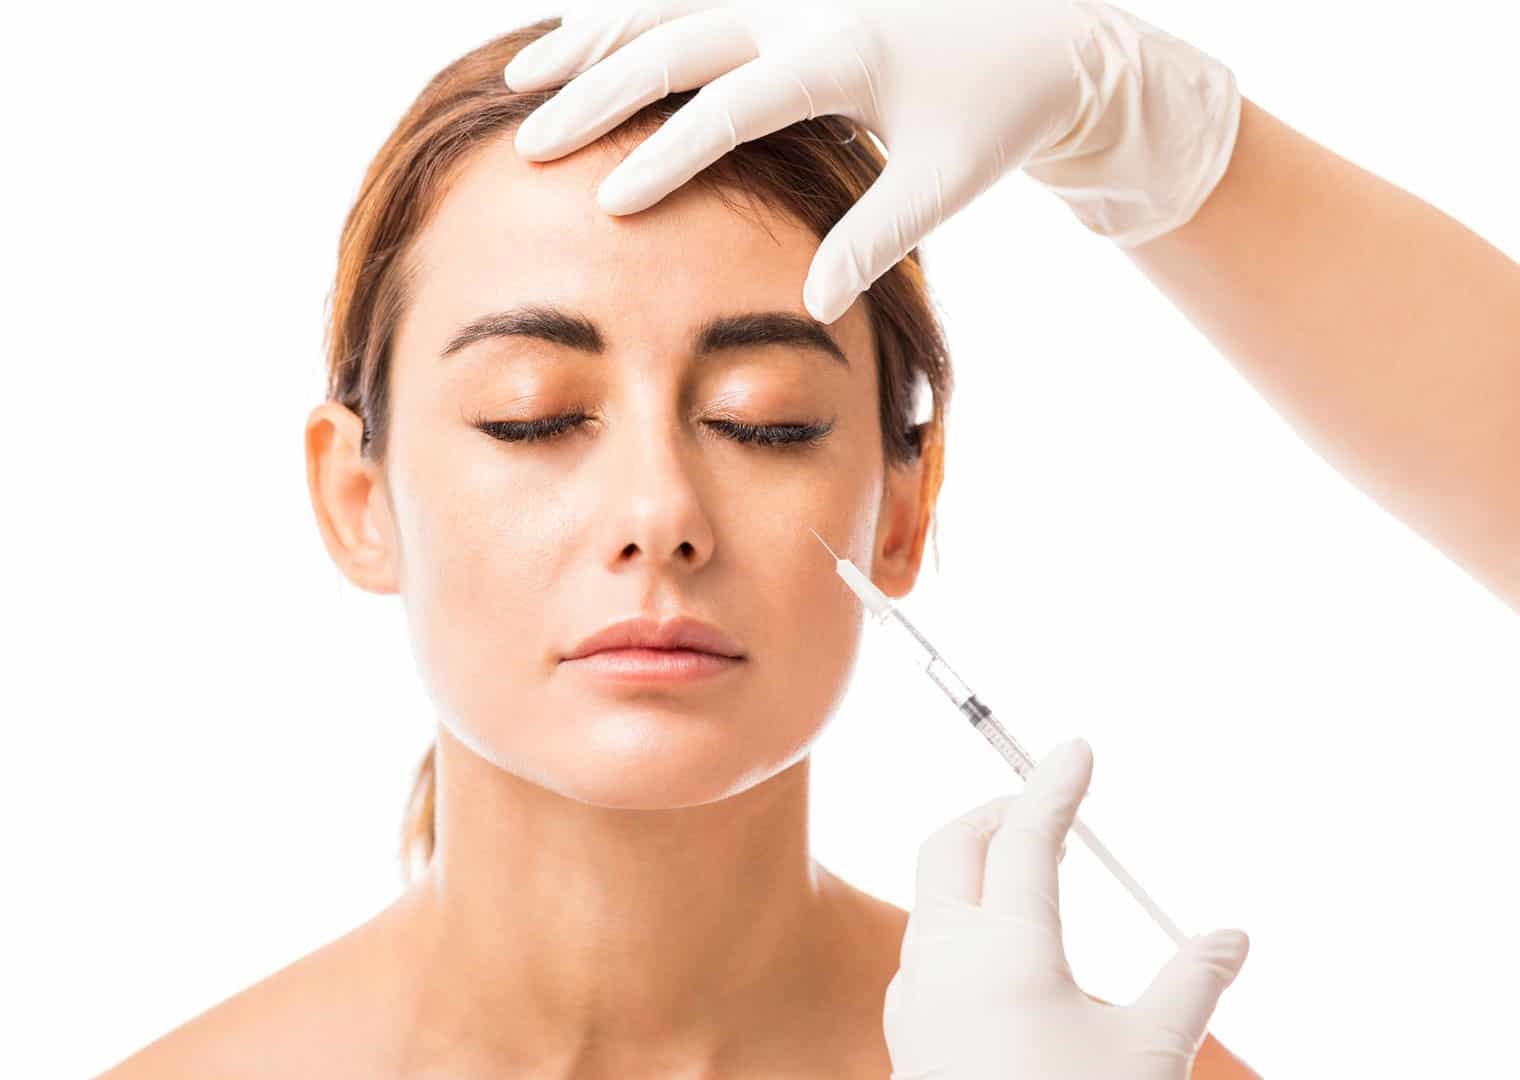 BOTOX IMAGES – Luxury Care Medical Clinic